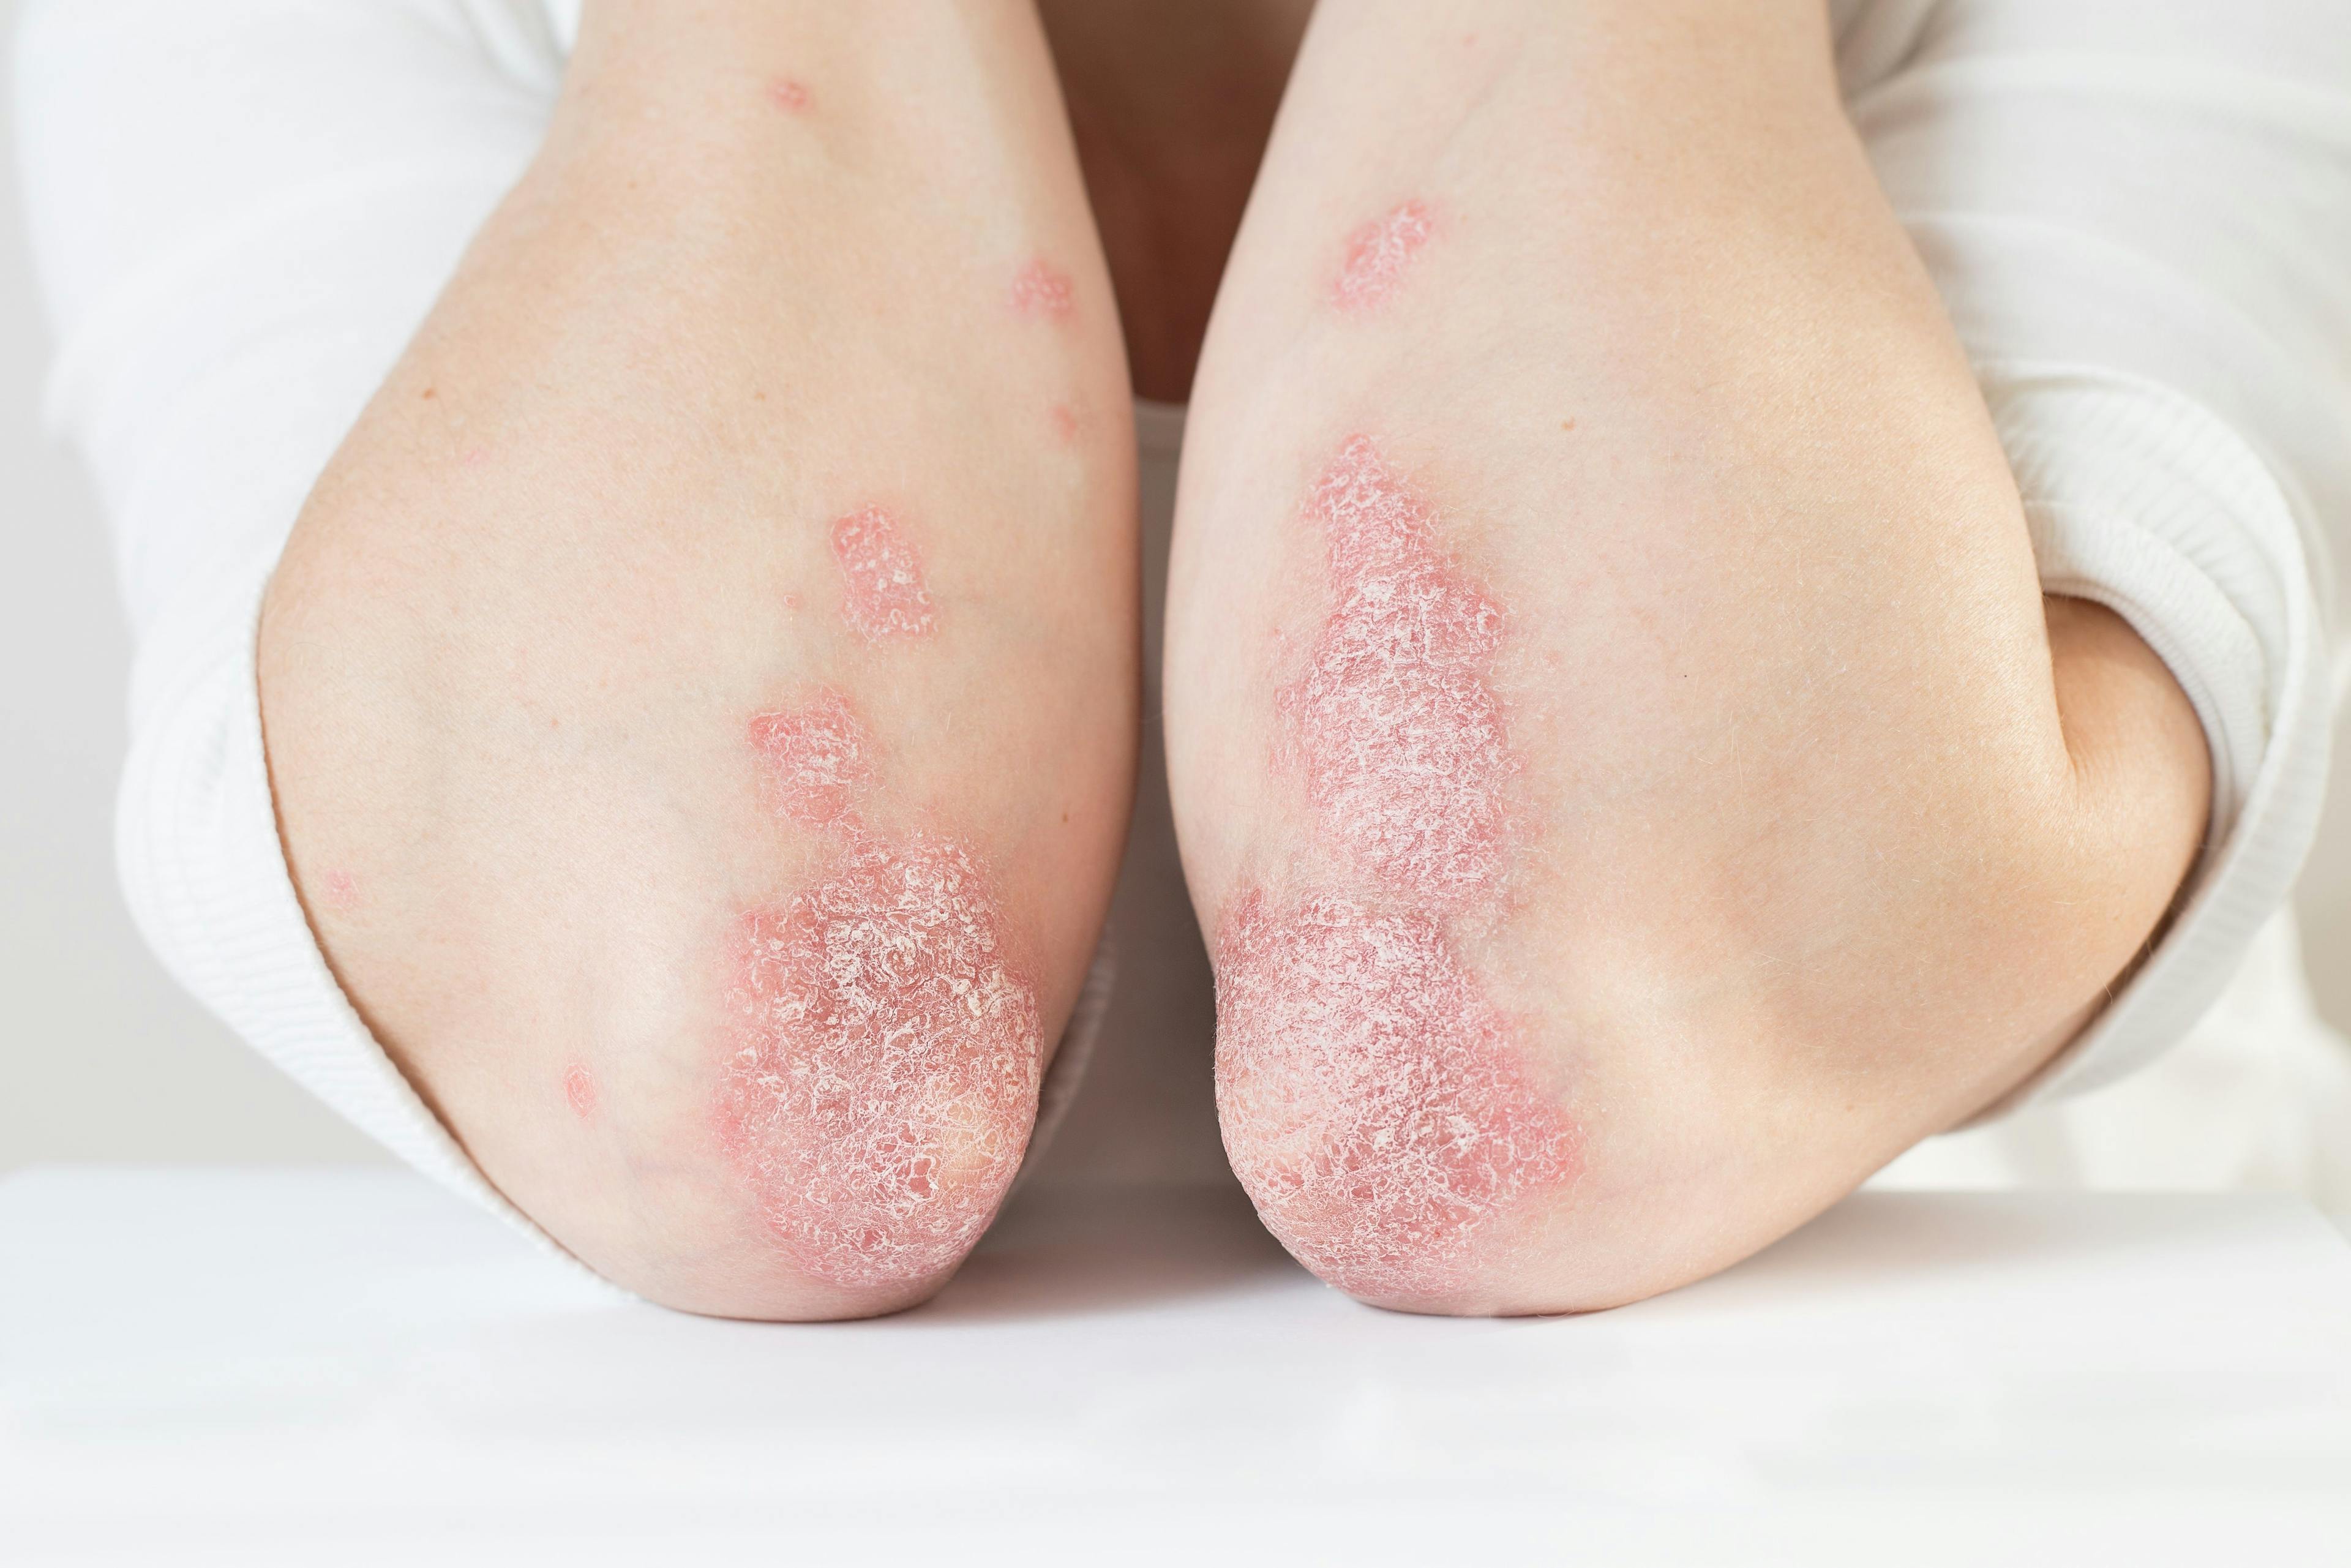 Apremilast demonstrates safety, efficacy in phase 3 trial for psoriasis in pediatric patients